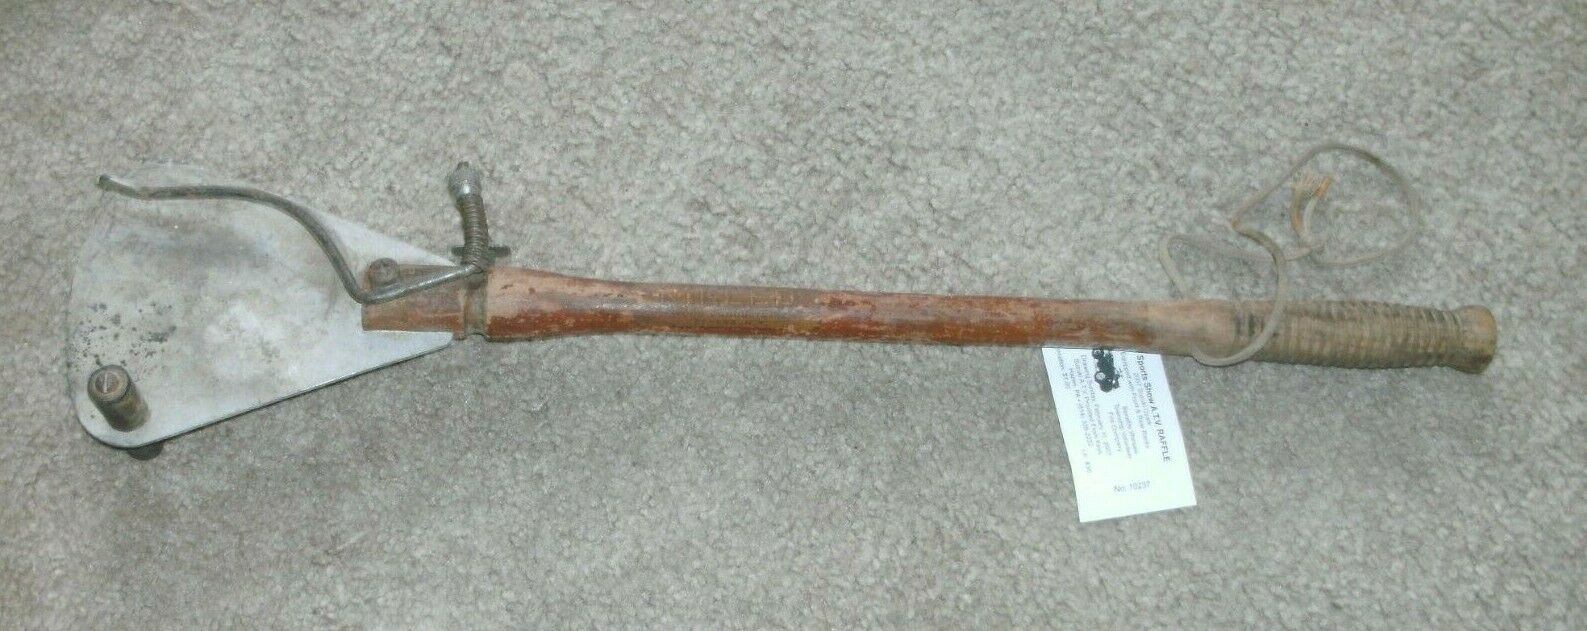 VINTAGE RARE MANUAL CLAY PIGEON THROWER NO MANUFACTURER NAME SEE PIC FOR MEASURE